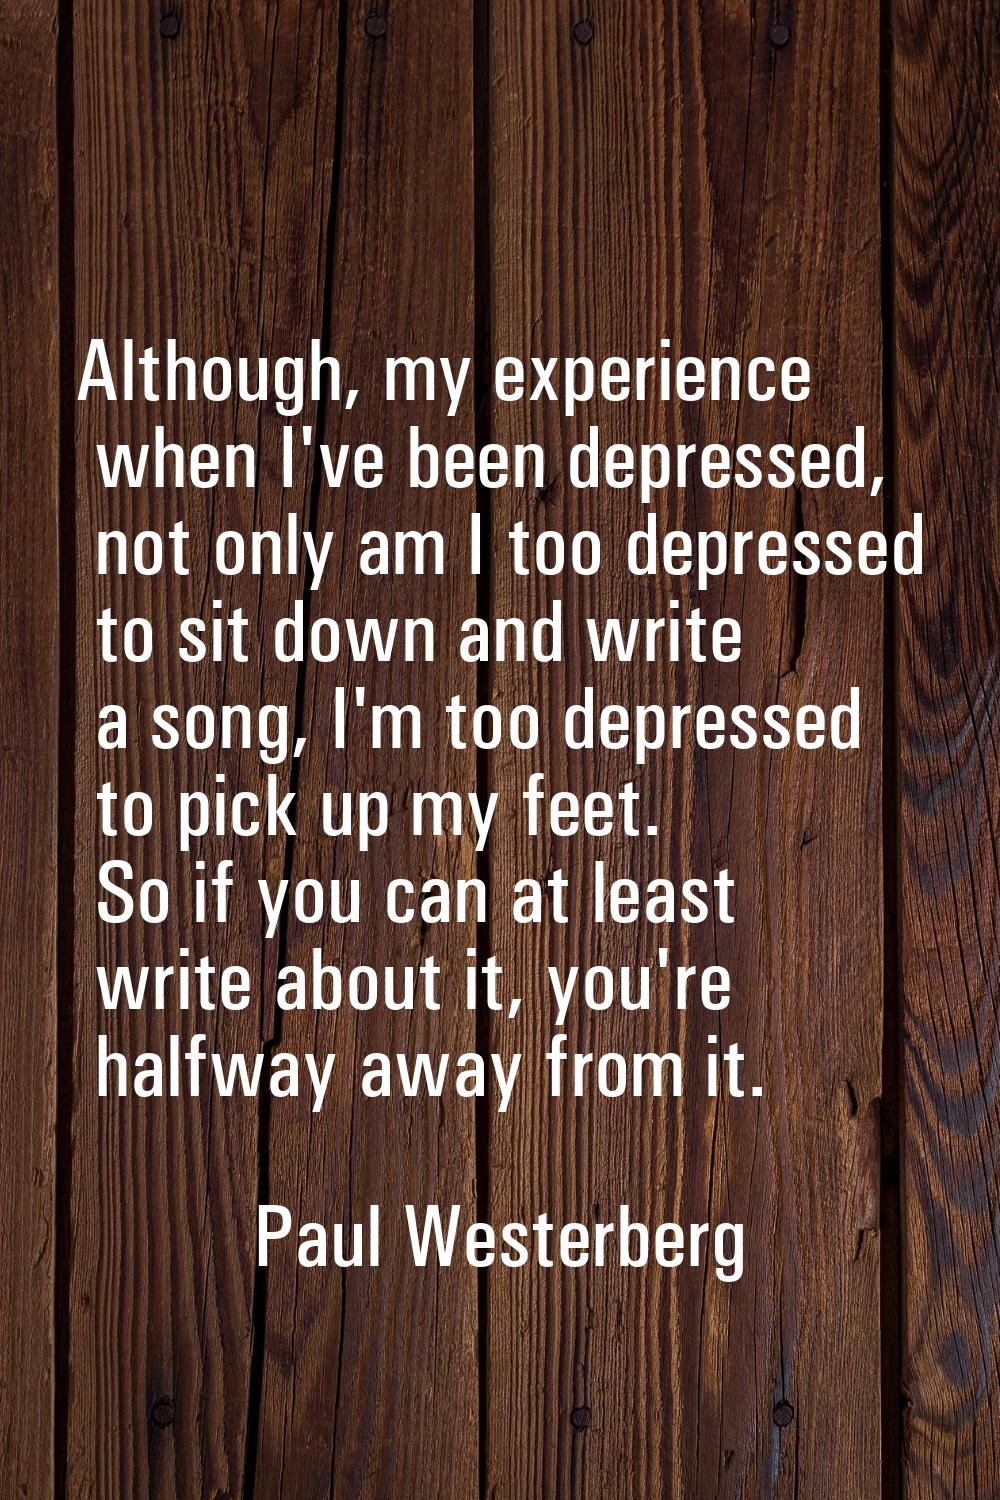 Although, my experience when I've been depressed, not only am I too depressed to sit down and write